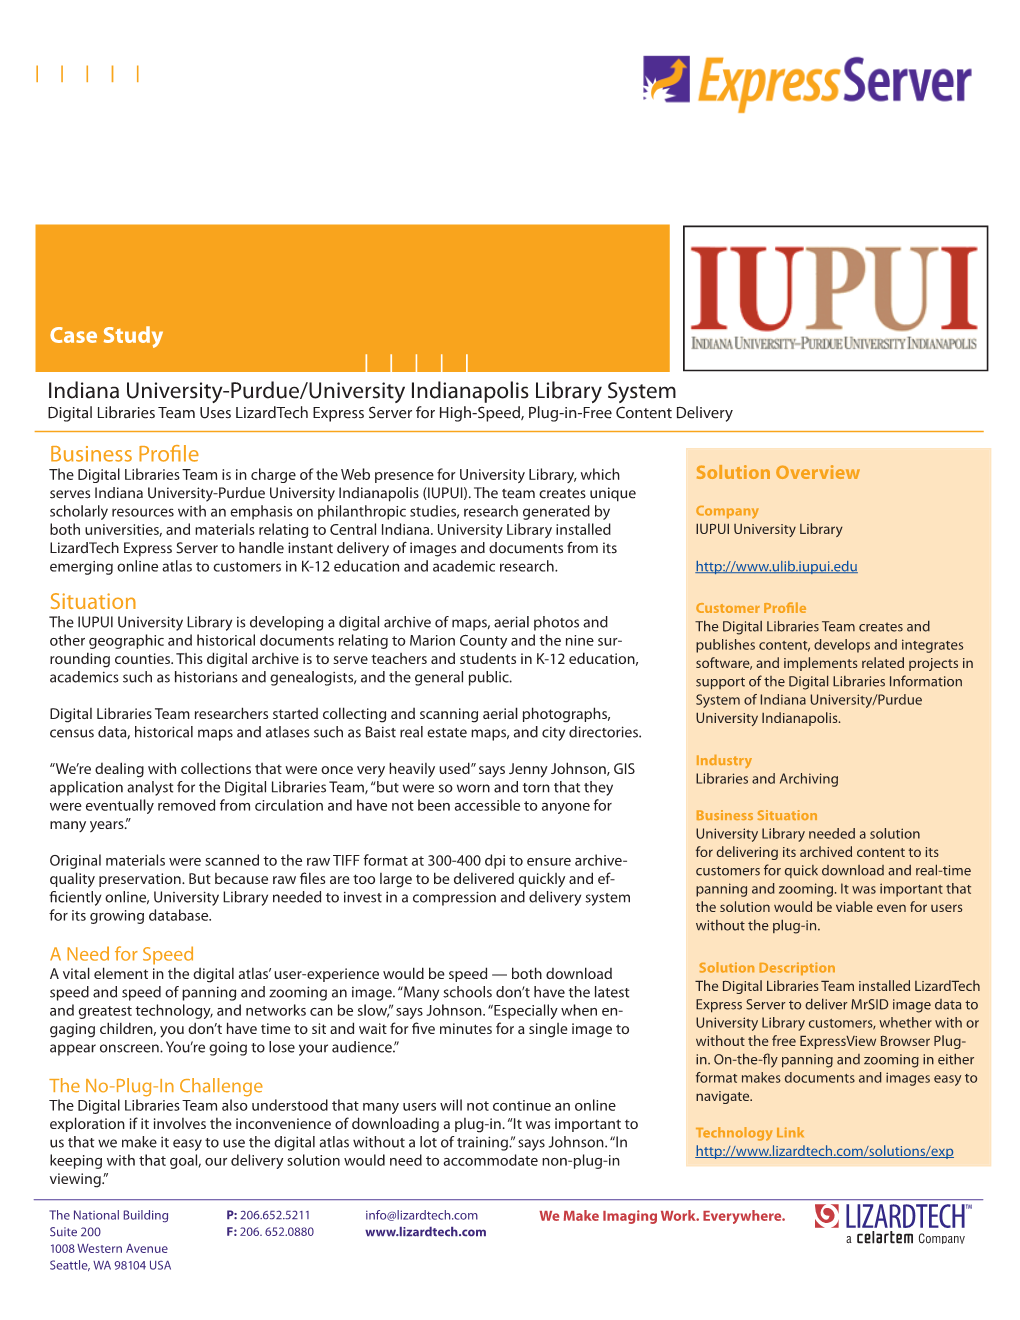 Case Study Business Profile Situation Indiana University-Purdue